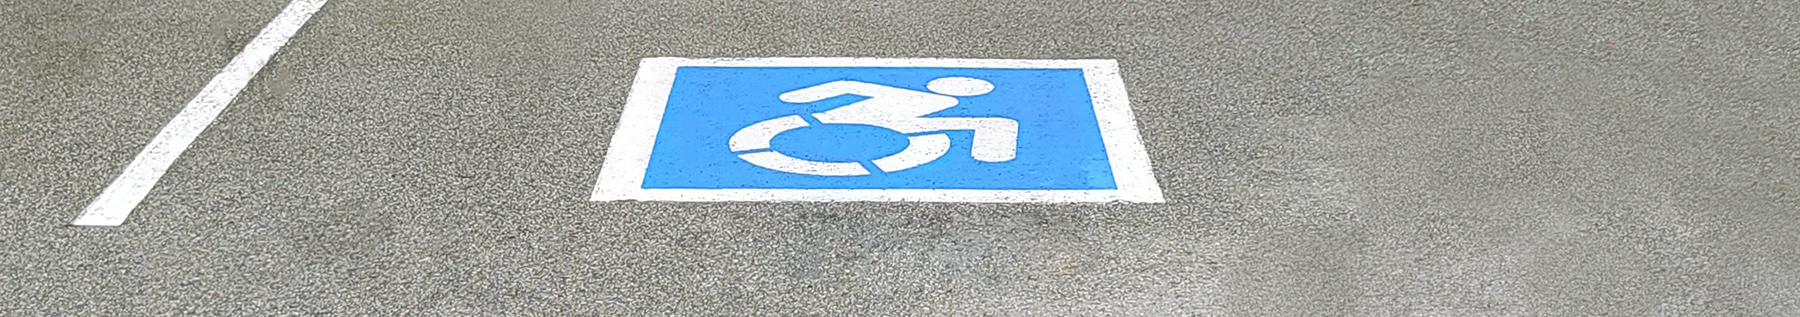 marked disabled parking spot